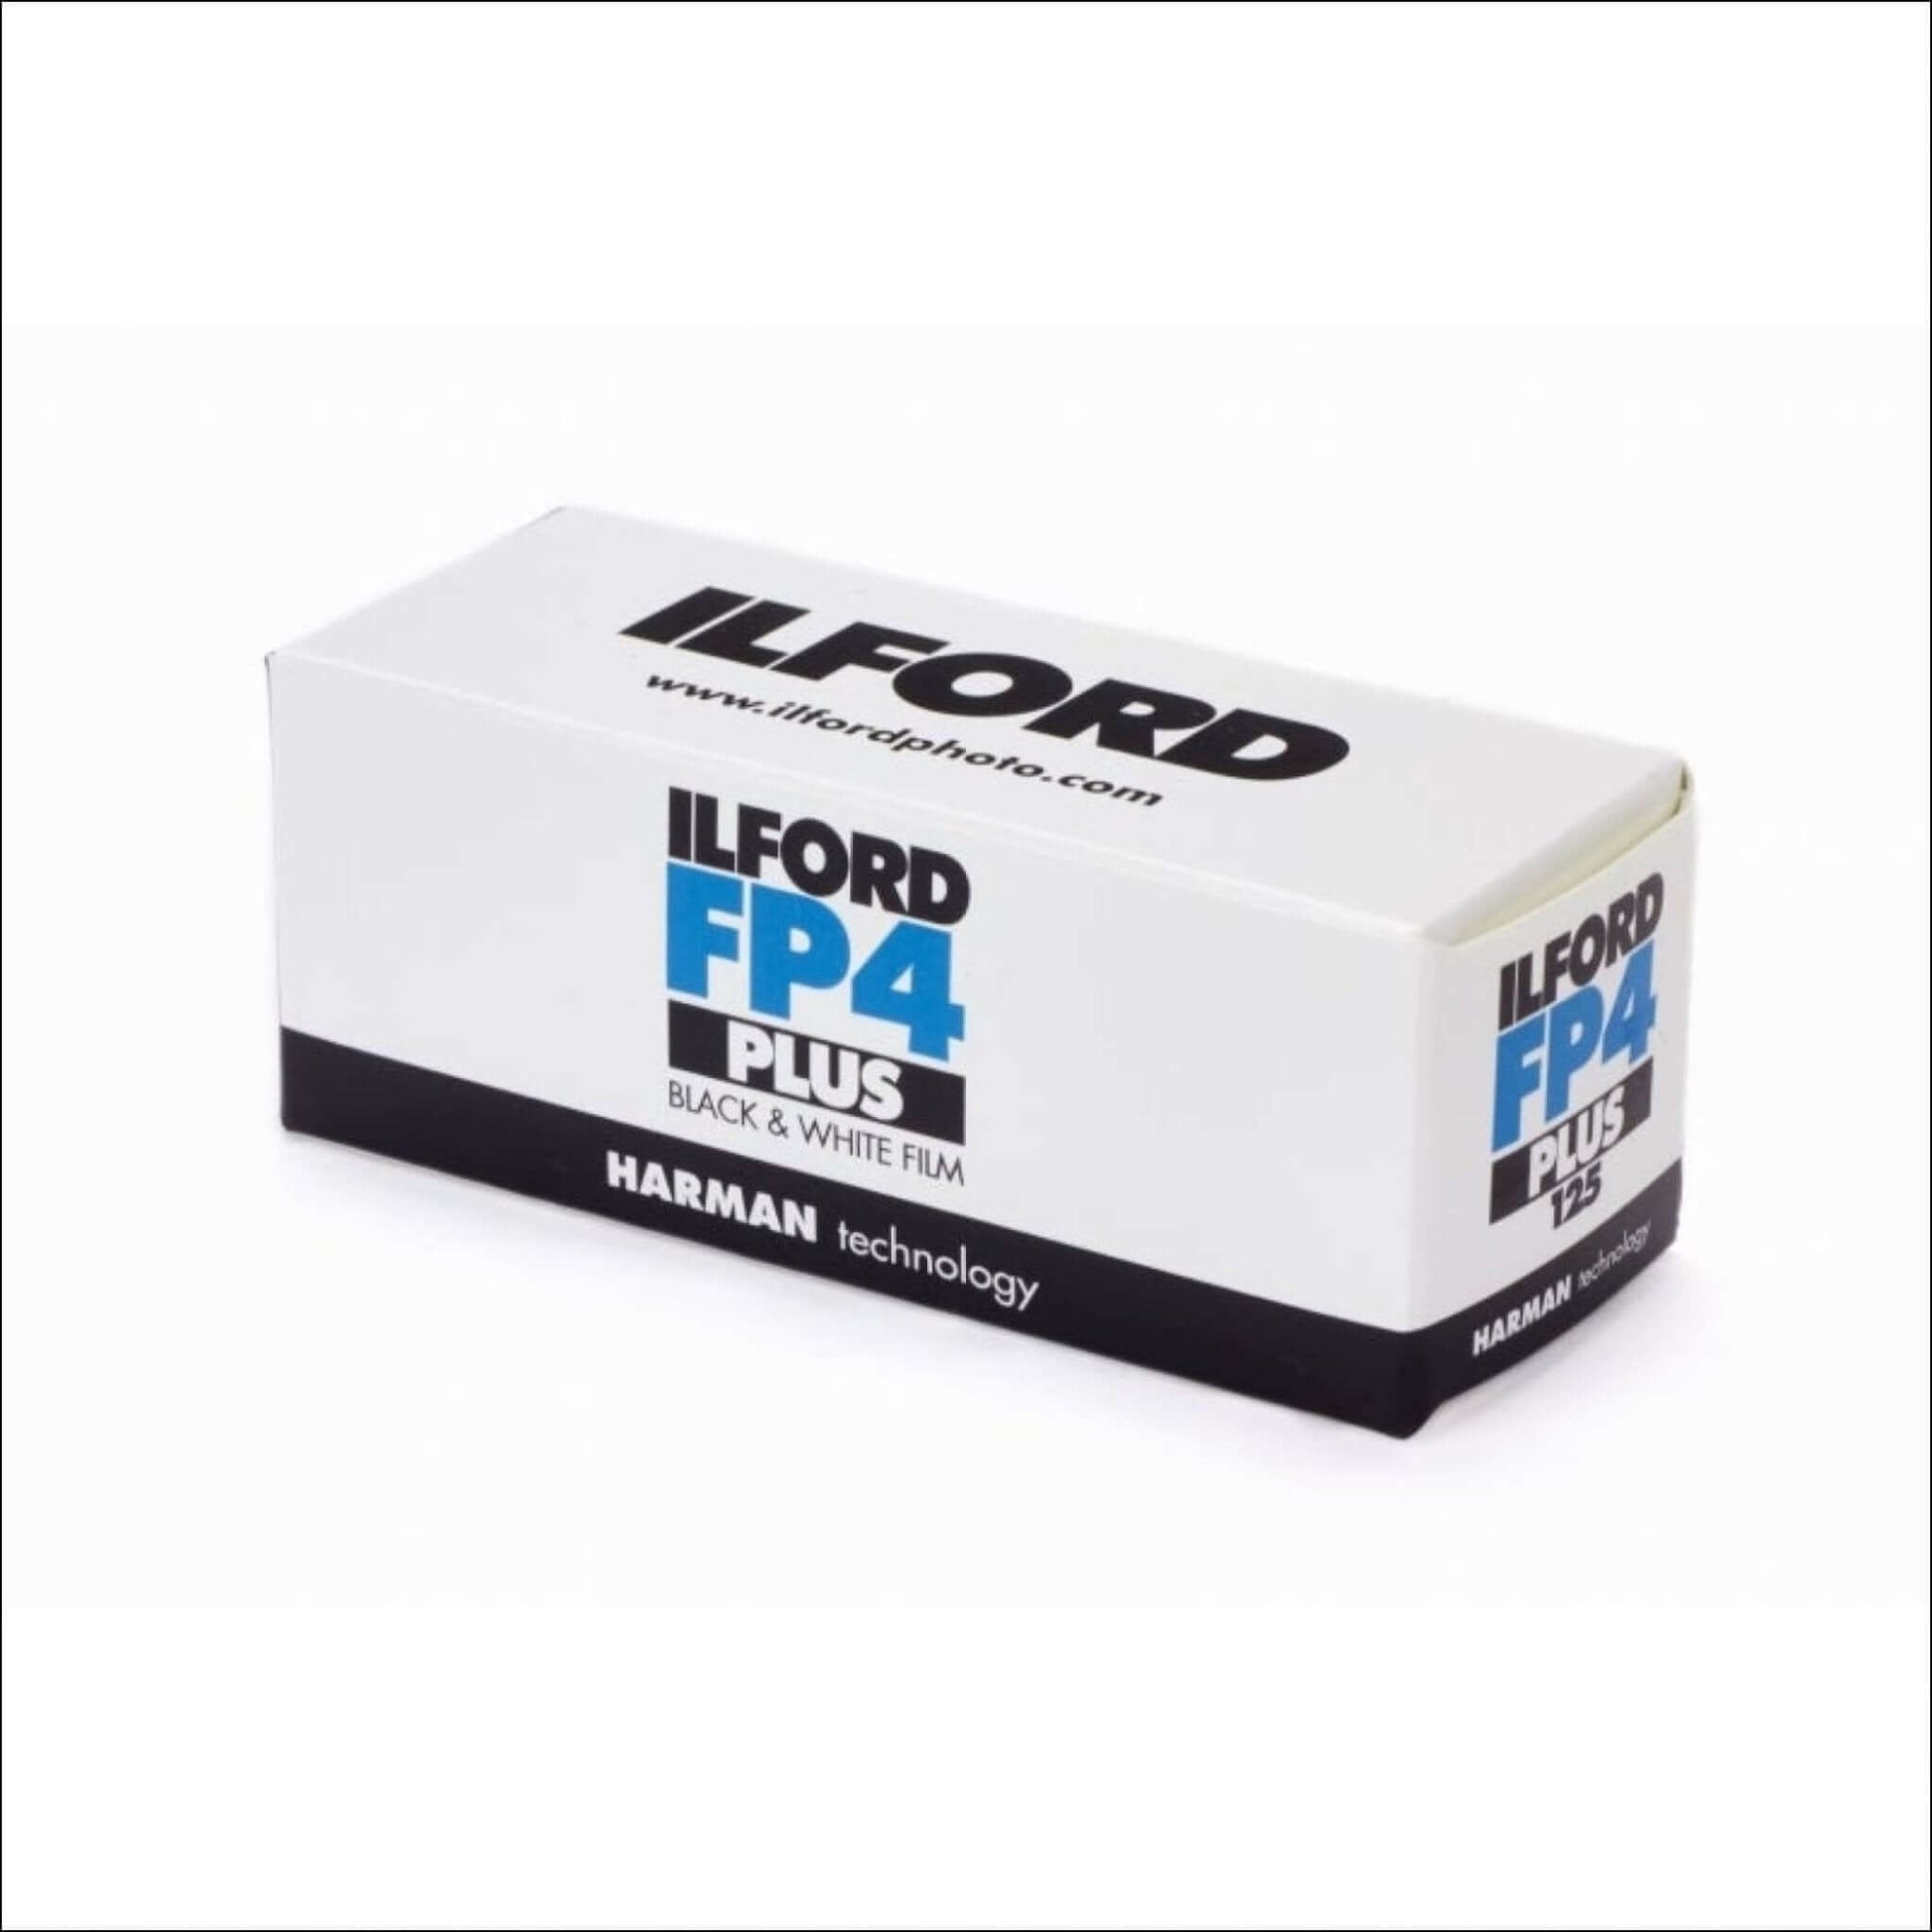 Ilford Fp4 Plus 125 Iso Black And White 120 Film Single Roll